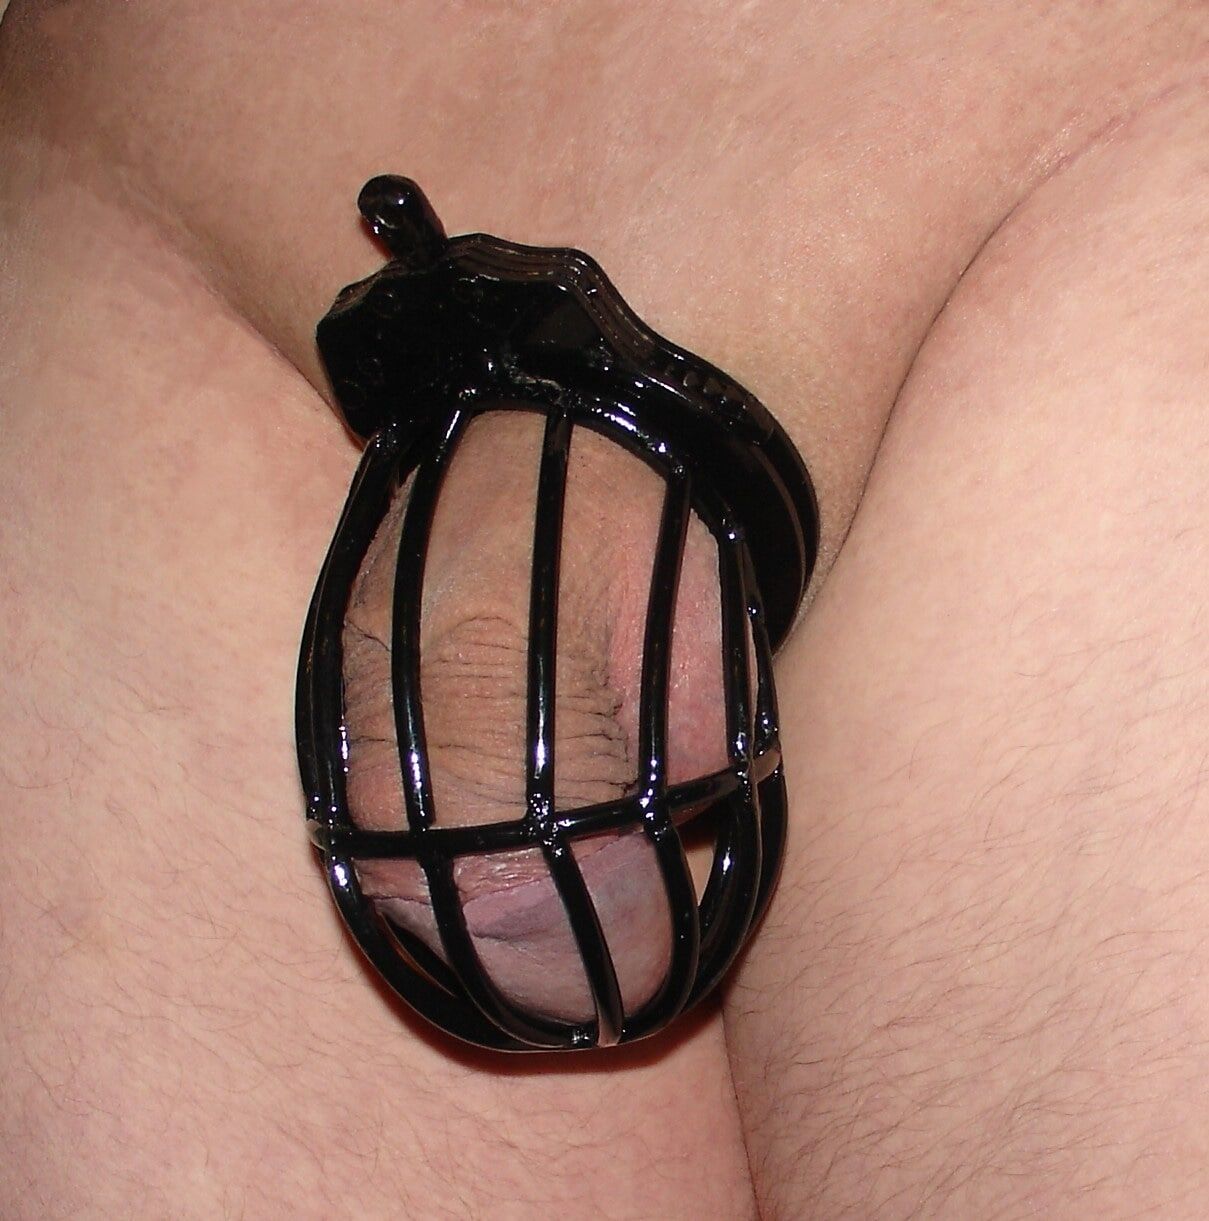 My collection of chastity cages #25